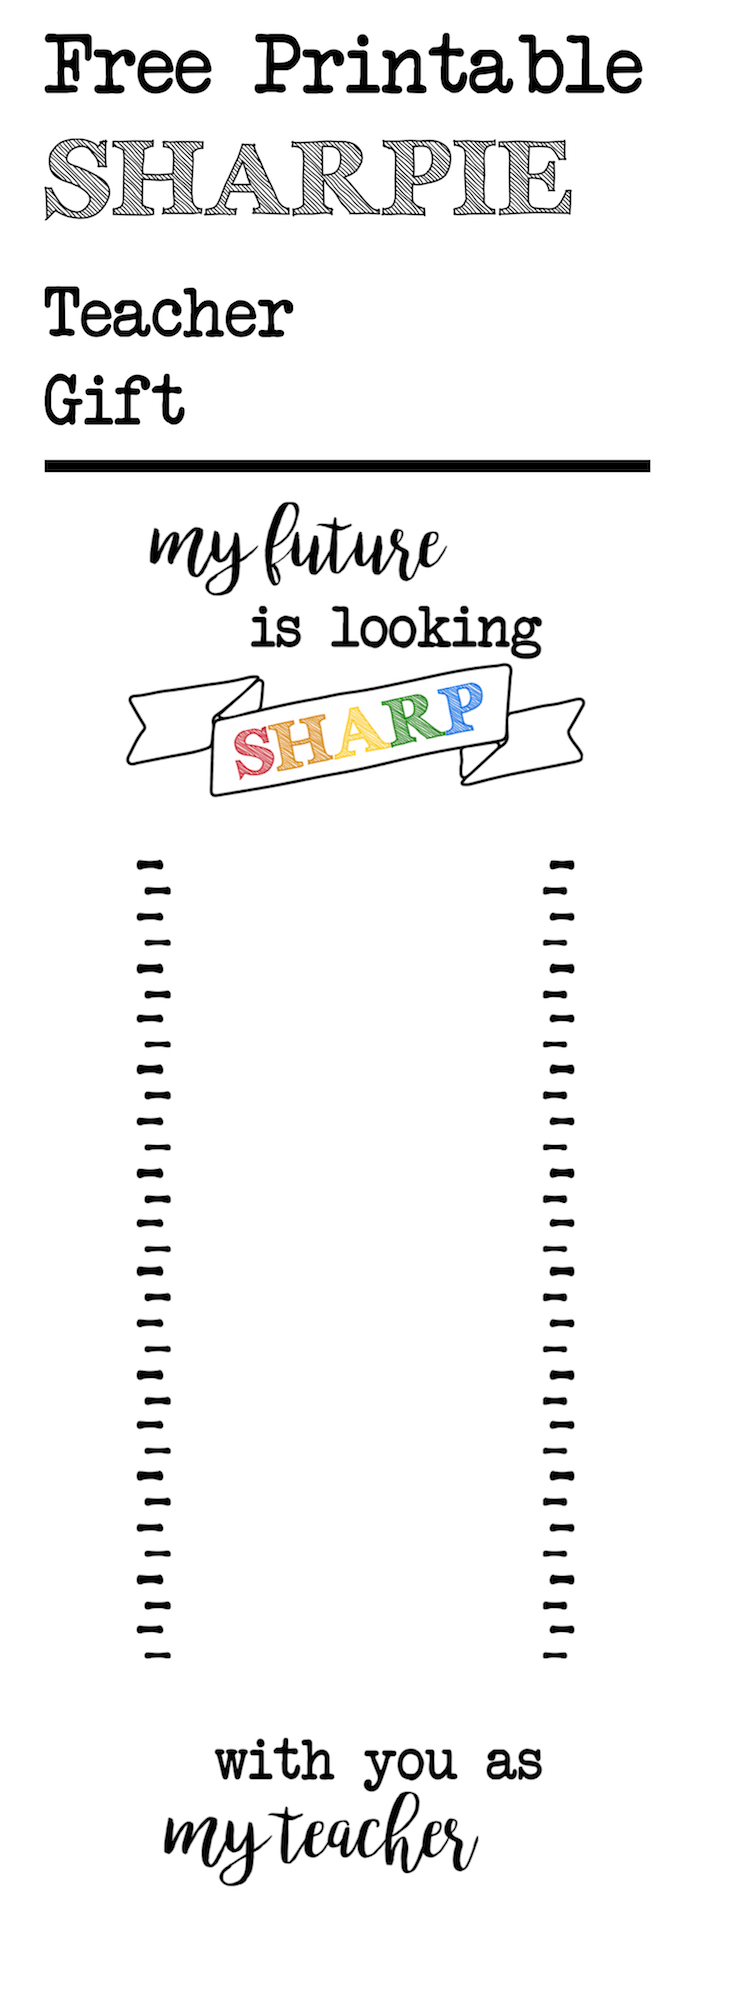 Back to school teacher gift sharpie free printable. Print this and attach sharpie markers to give to your child's teacher to show them you appreciate them.